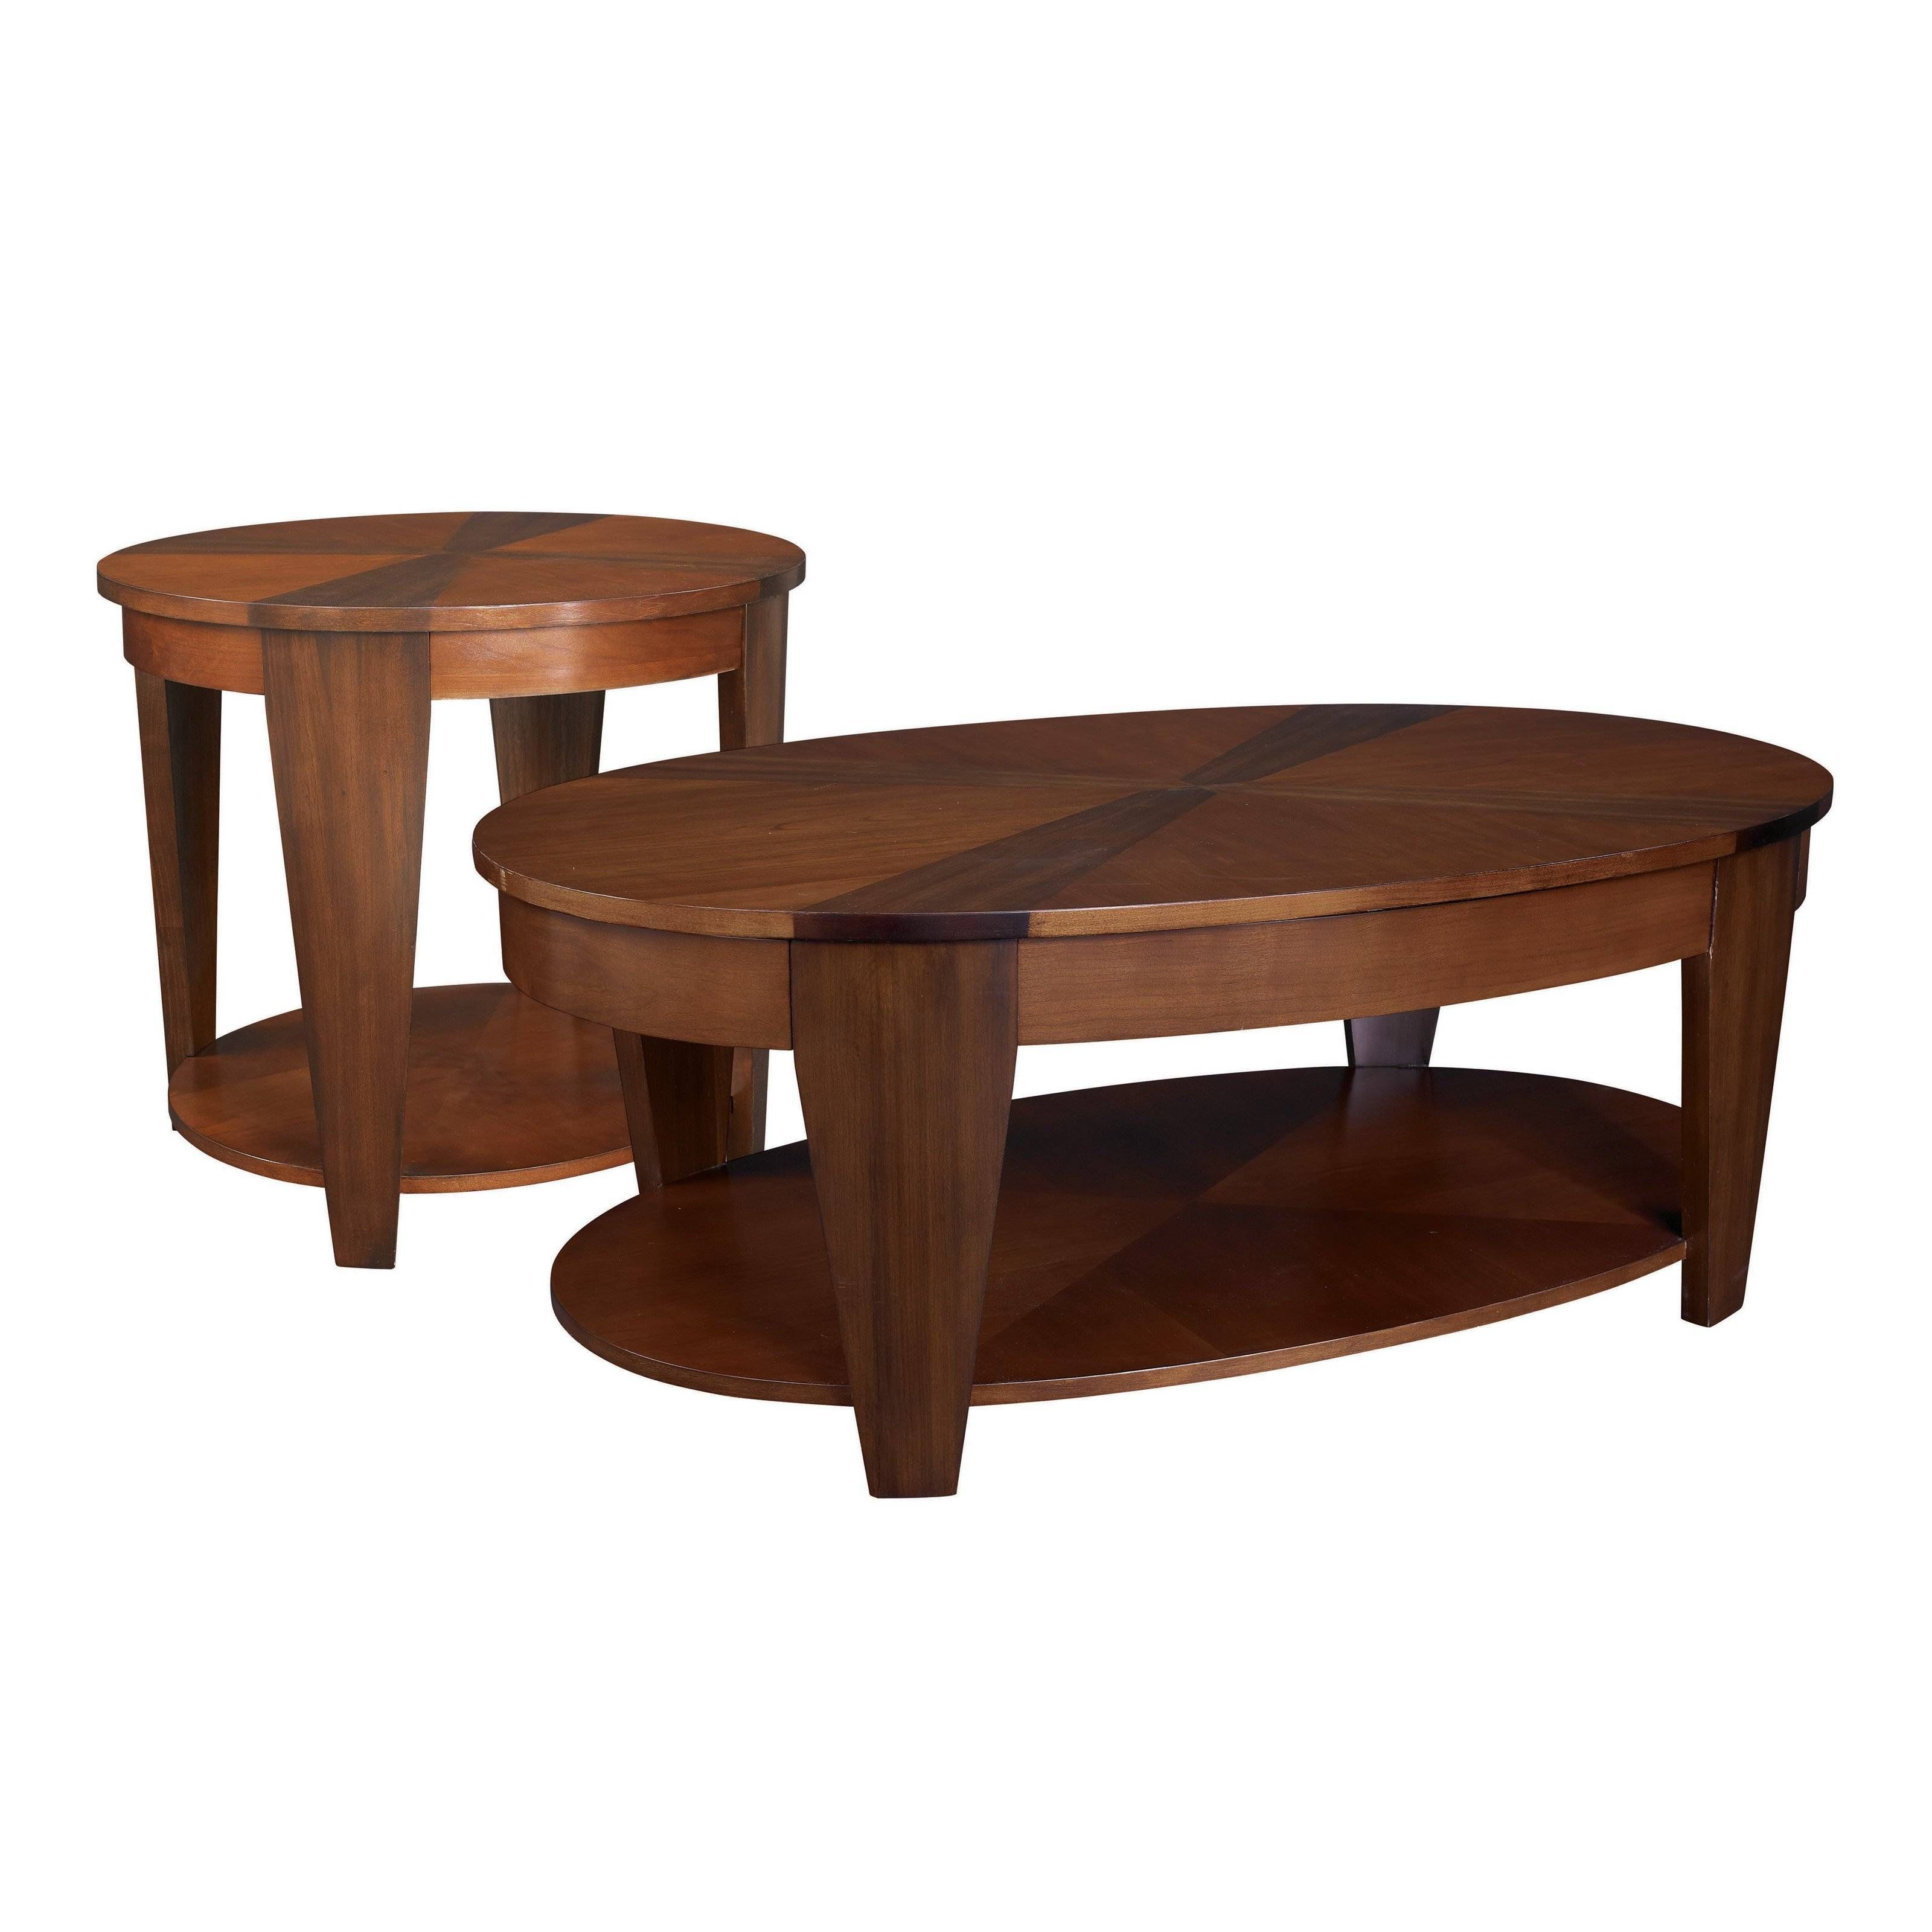 Hammary Oasis 2 Piece Oval Coffee Table Set | Hayneedle In 2 Piece Coffee Table Sets (View 20 of 30)